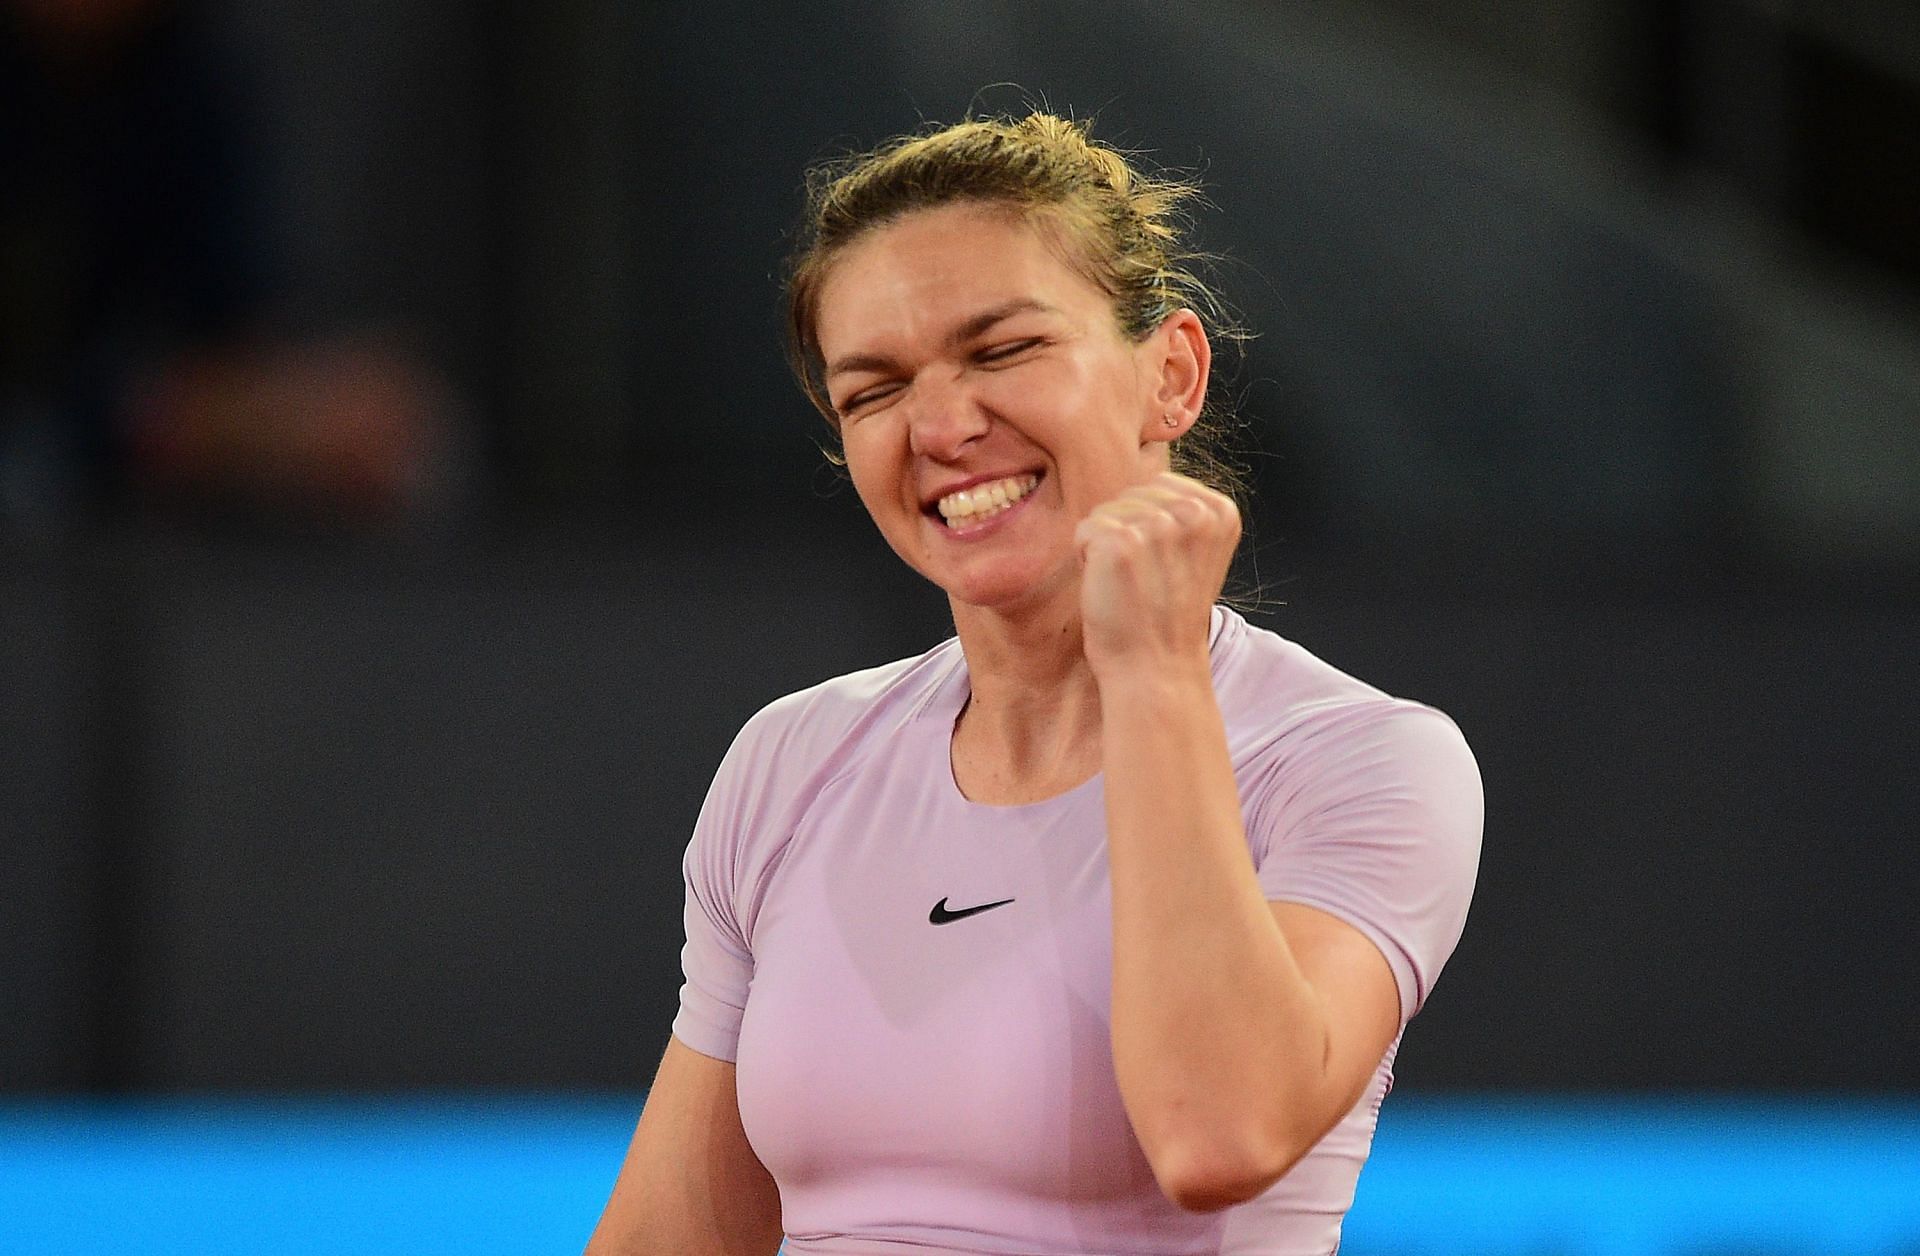 Halep scored her 30th main draw victory in the Madrid Open.